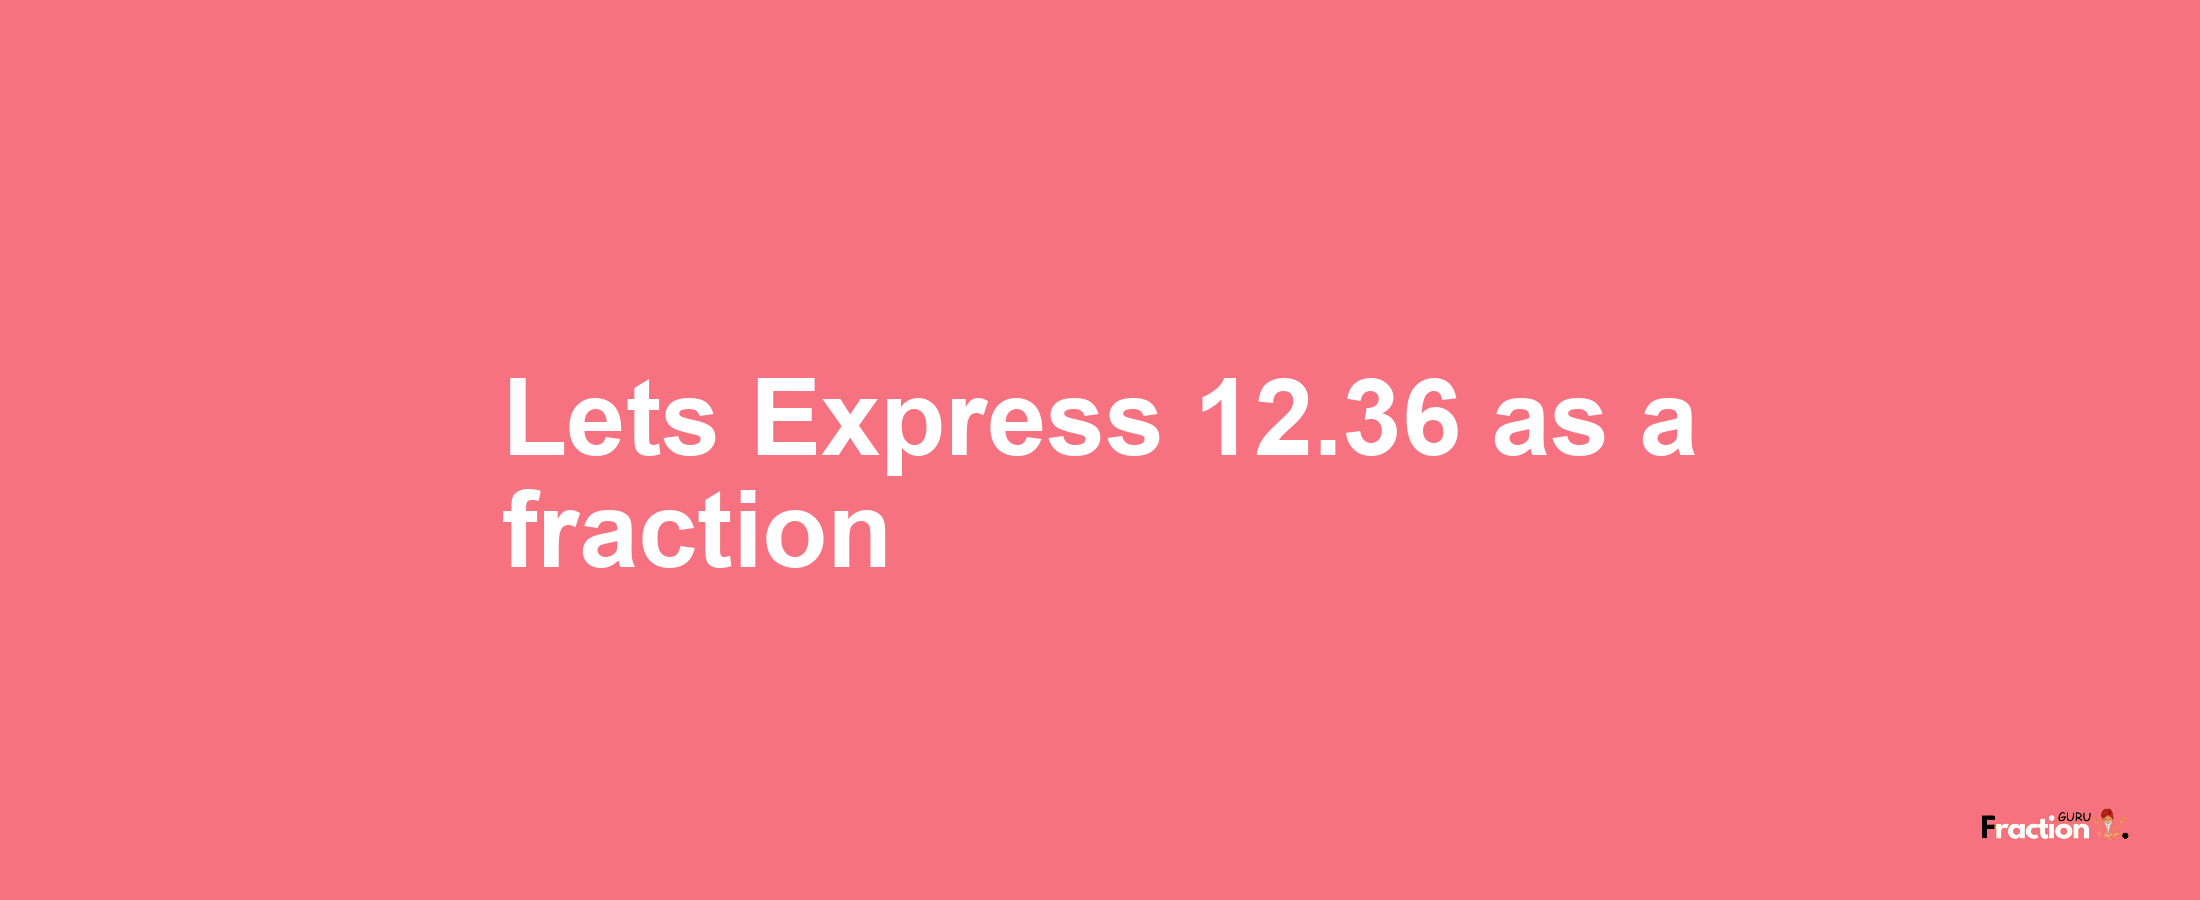 Lets Express 12.36 as afraction